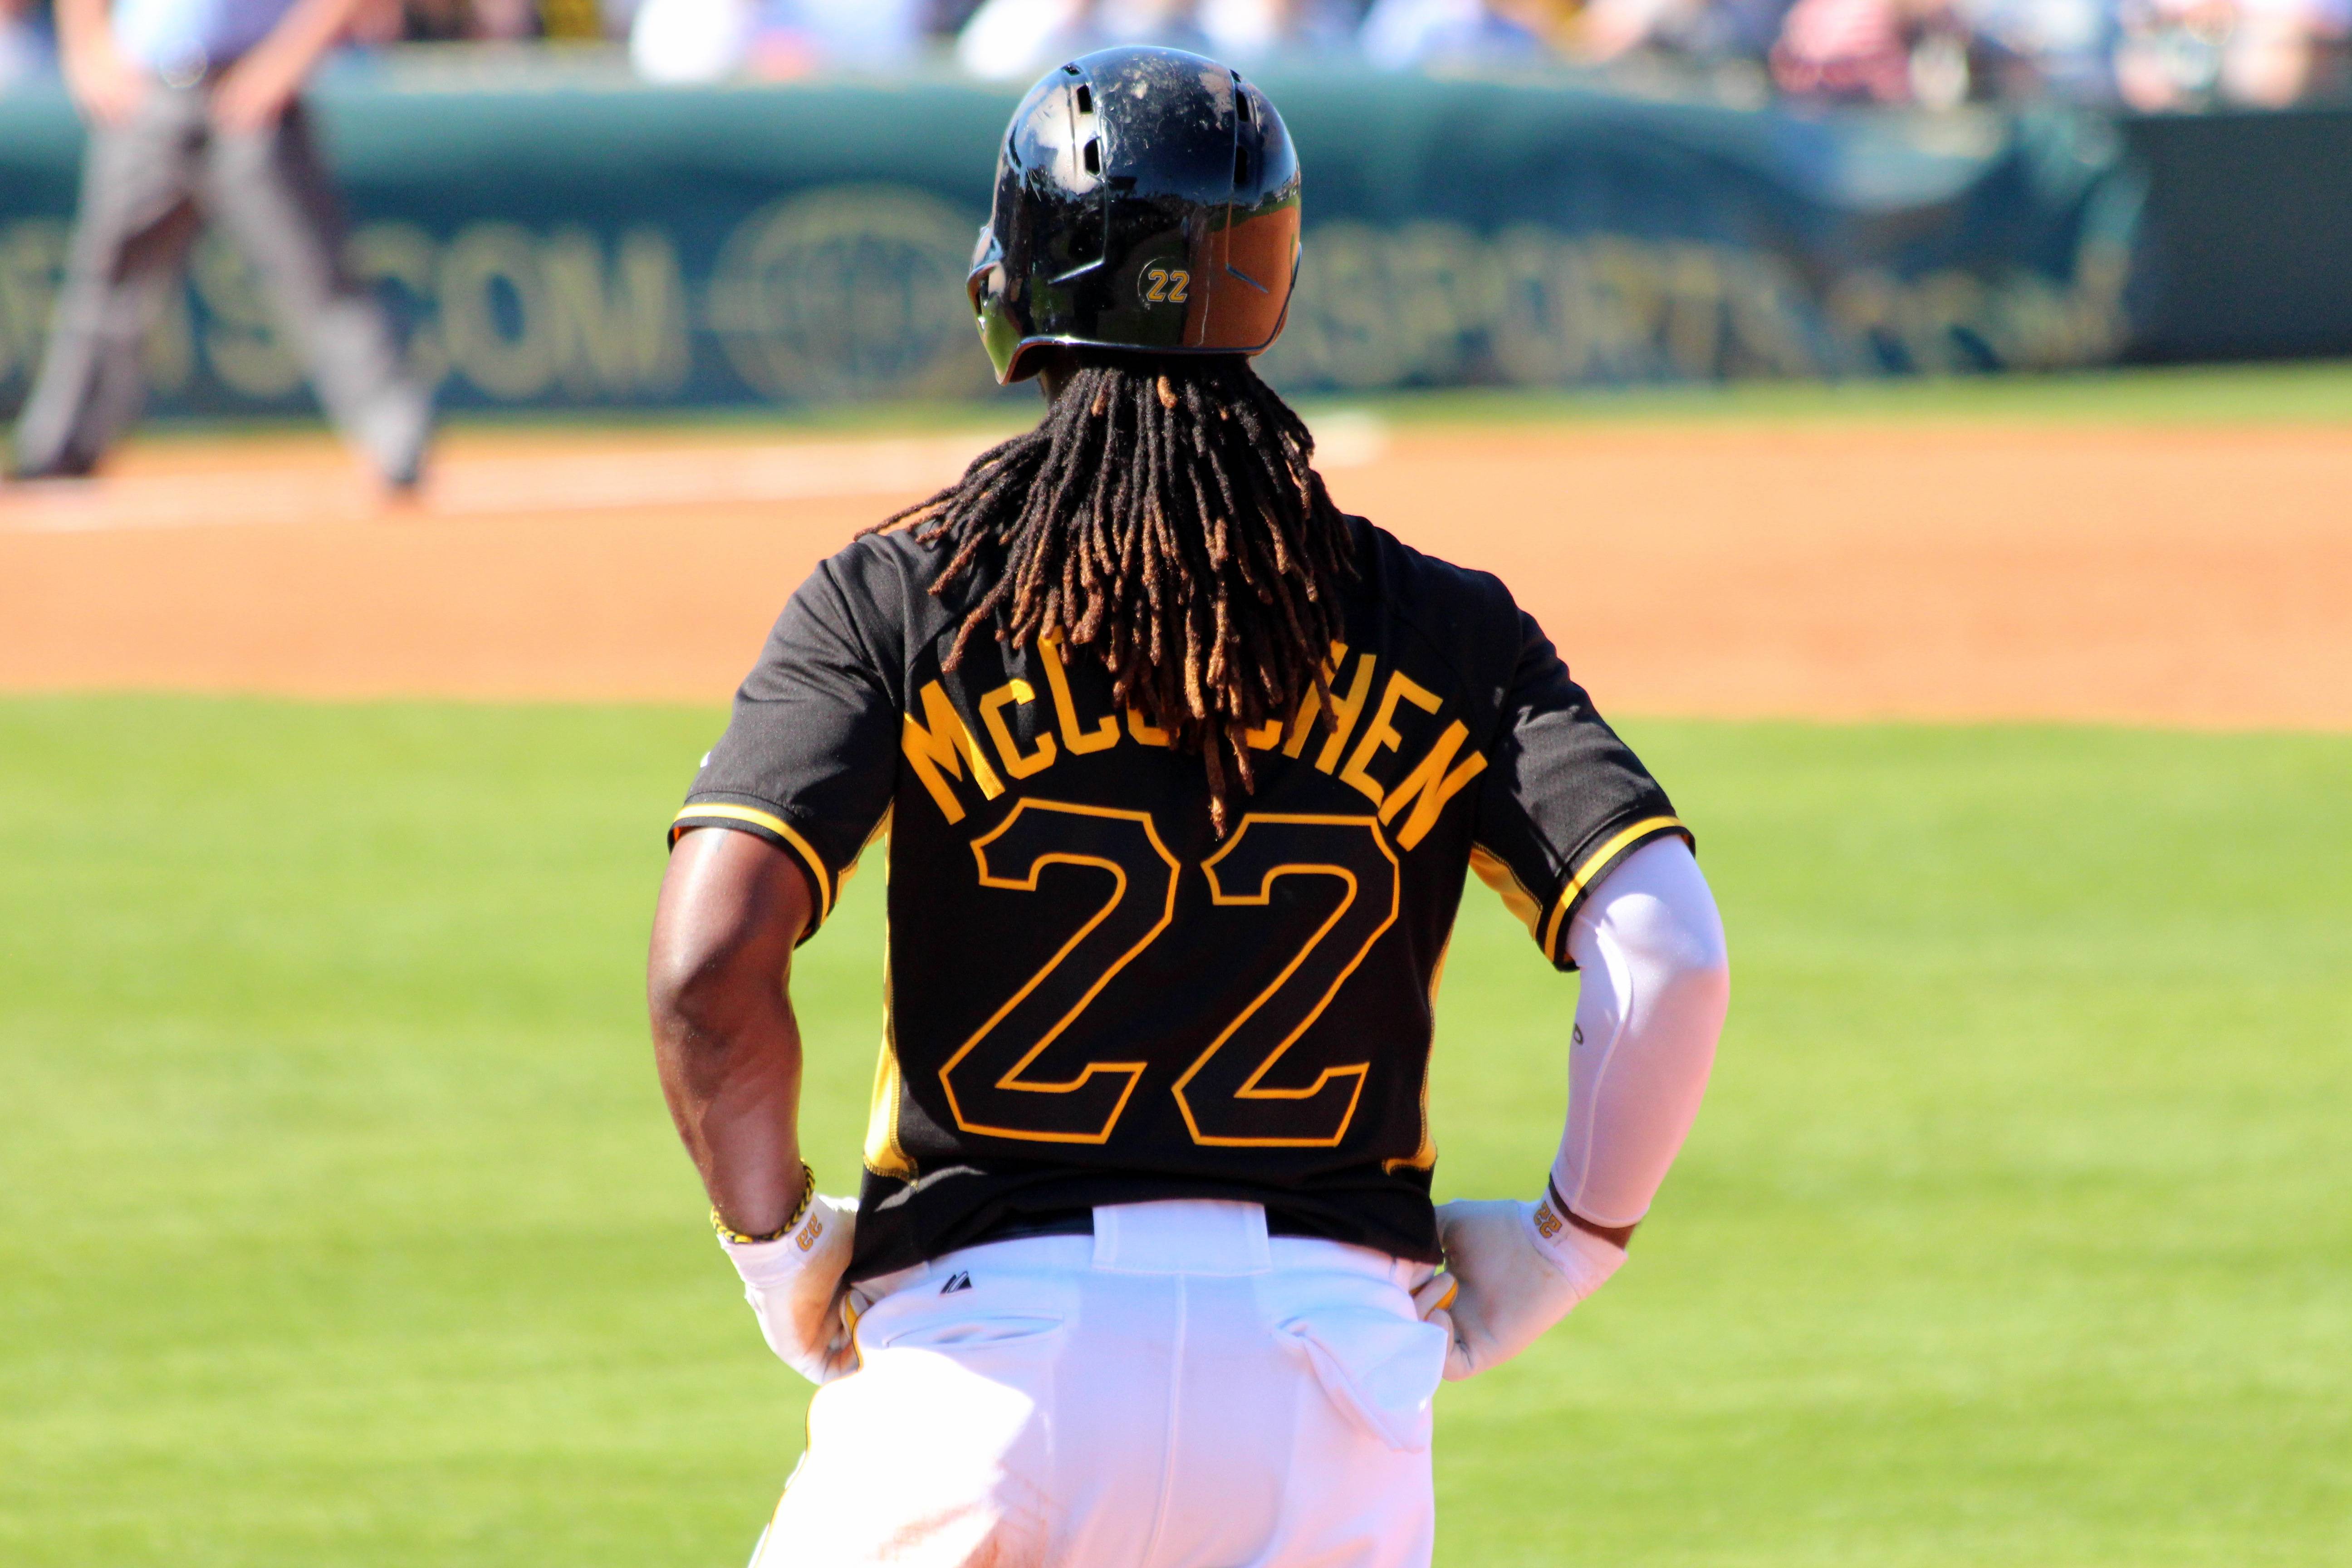 image For > Andrew Mccutchen Stealing